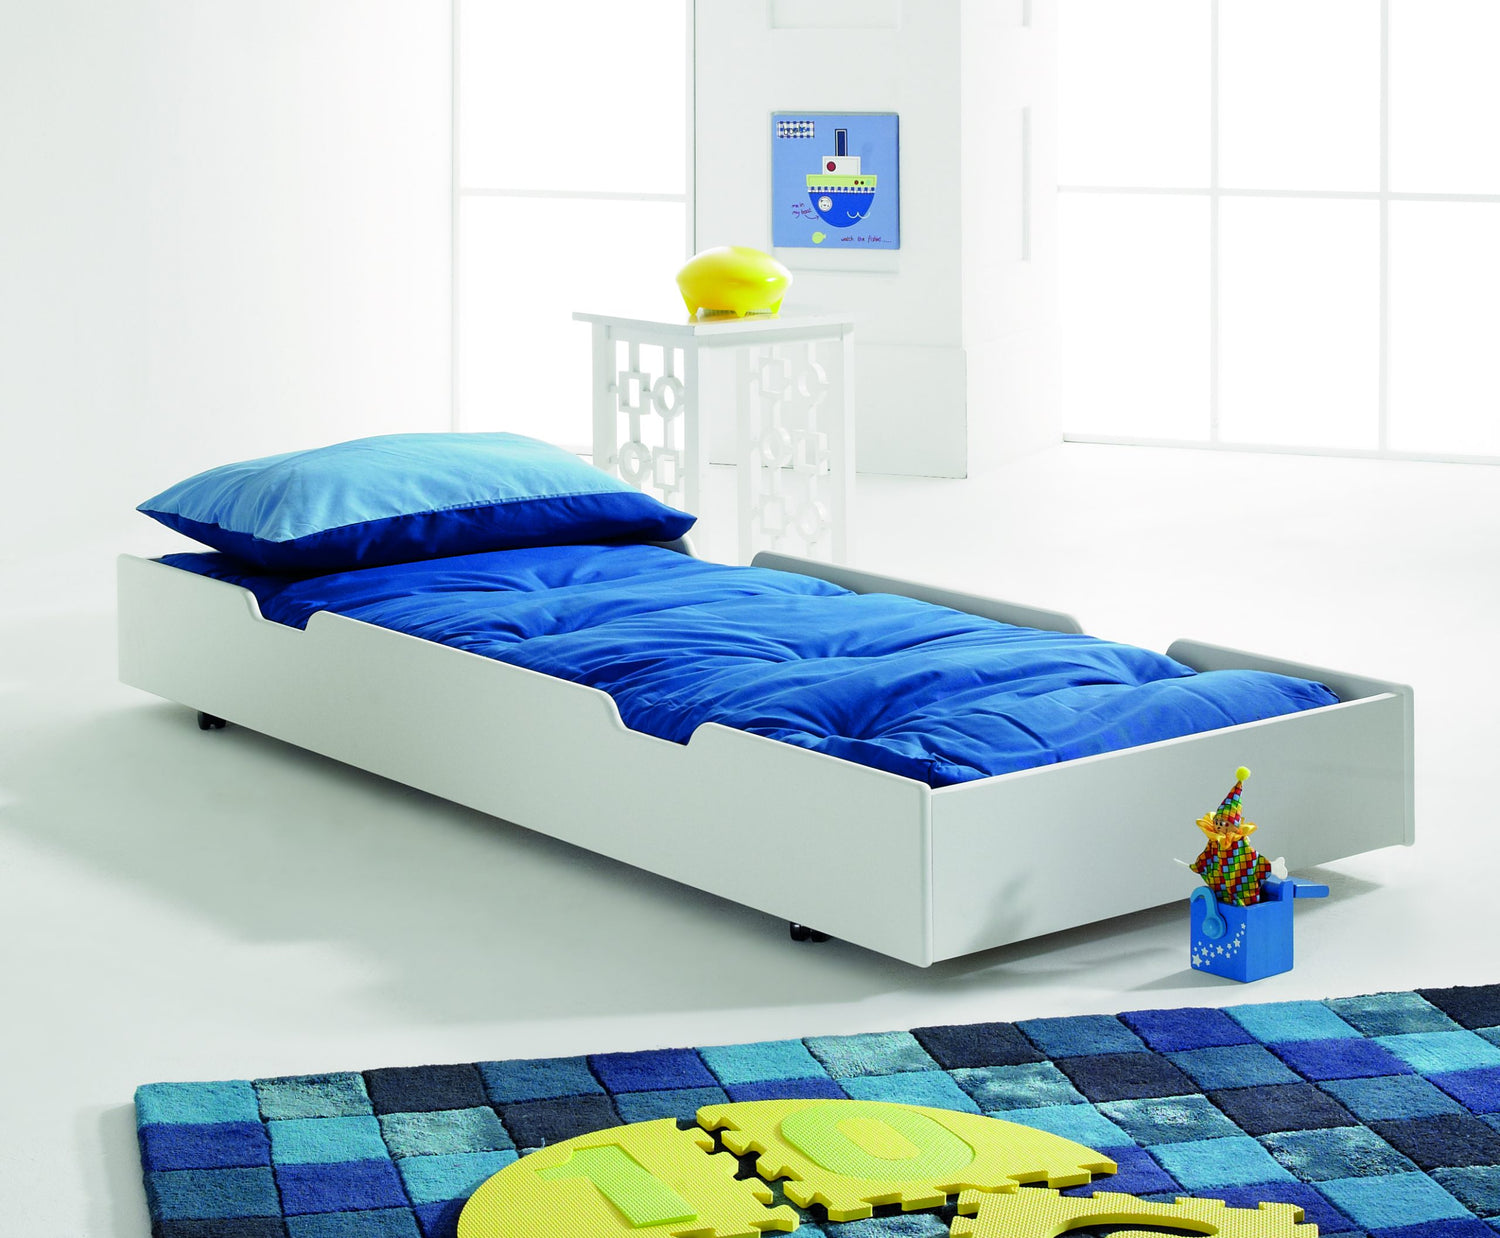 Scallywag Tuckaway Trundle Bed Including Futon Mattress (also available in white)